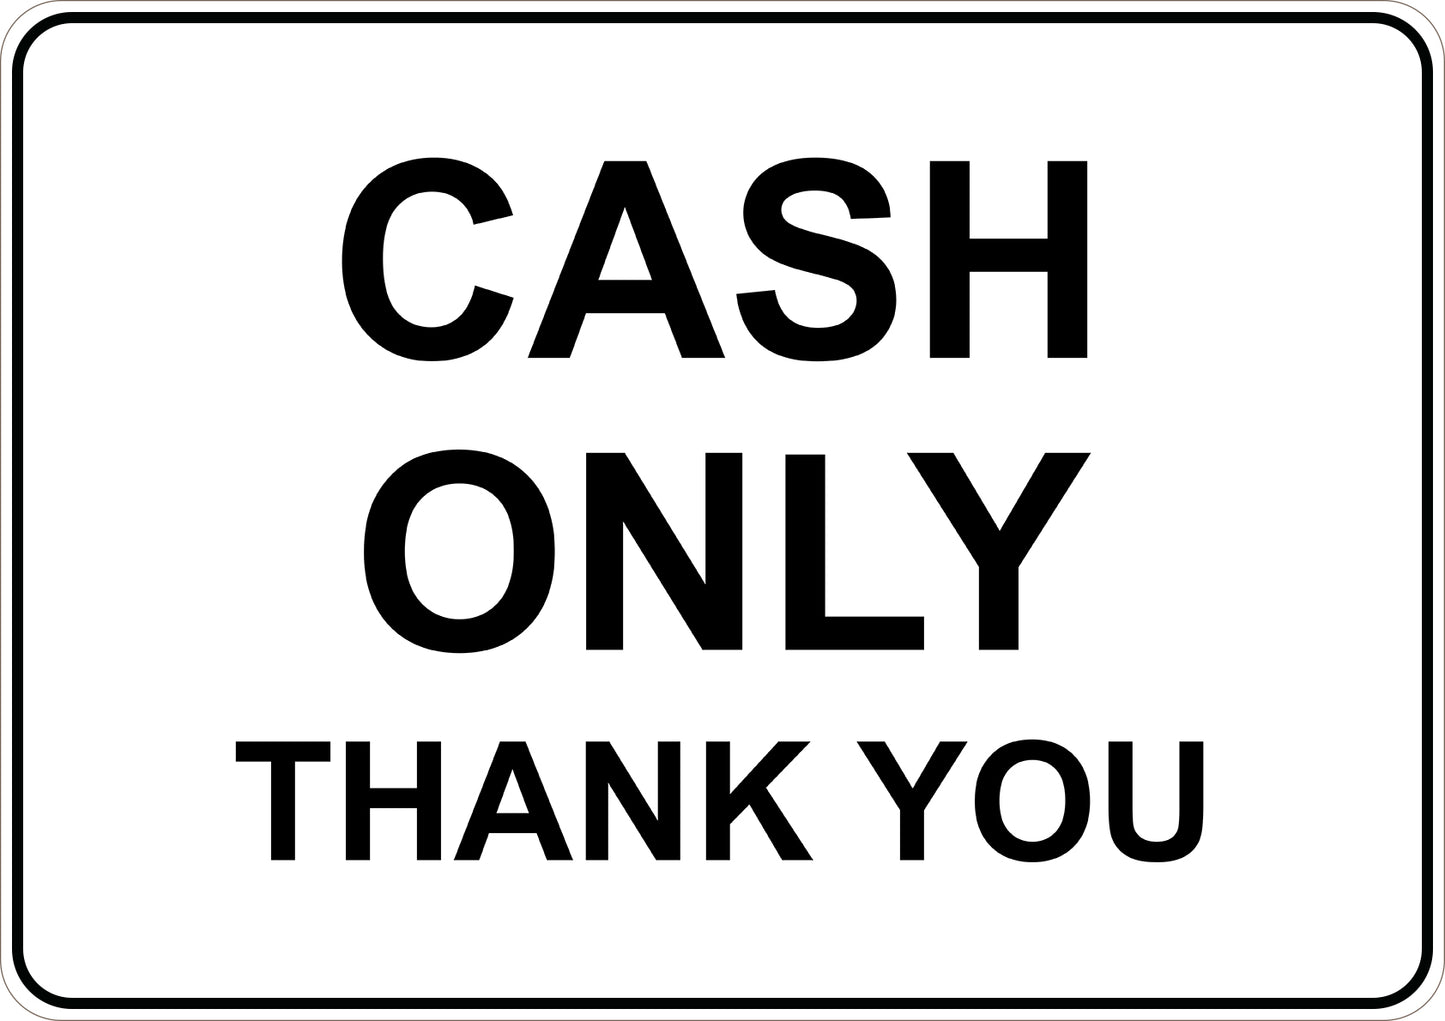 Cash Only Thank You Printed Sign